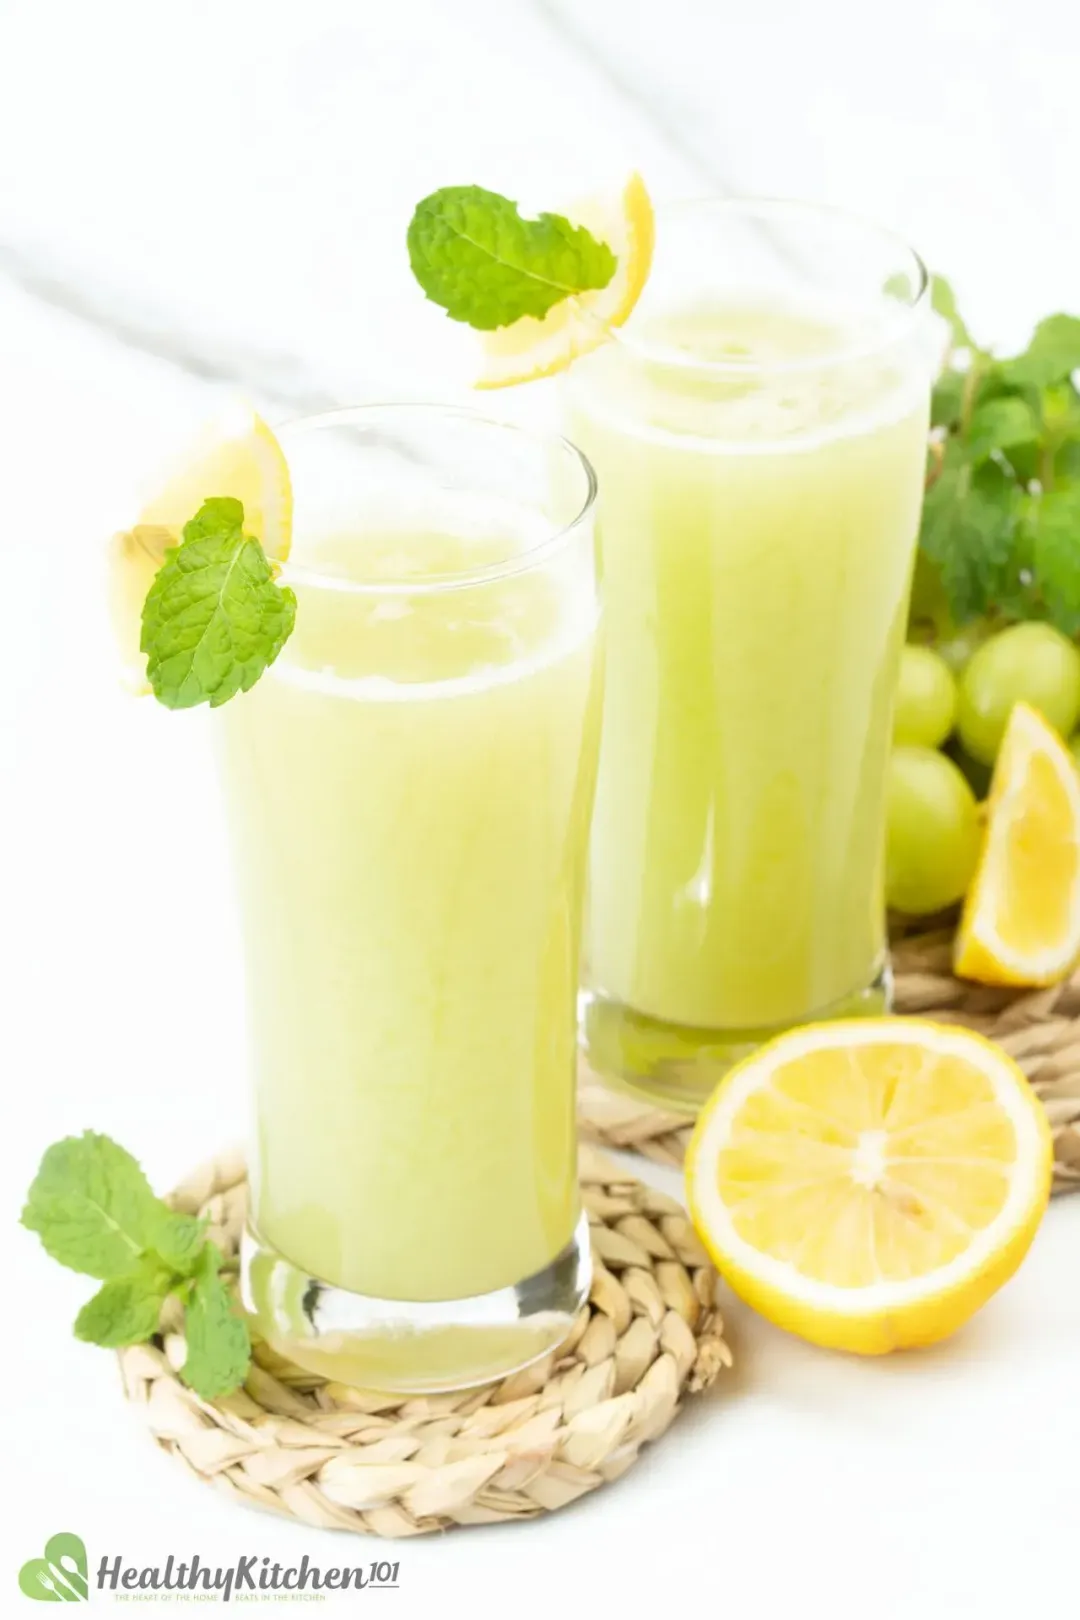 Two glasses of green grape juice with a wedge of lemon and mint leaves placed on their rims